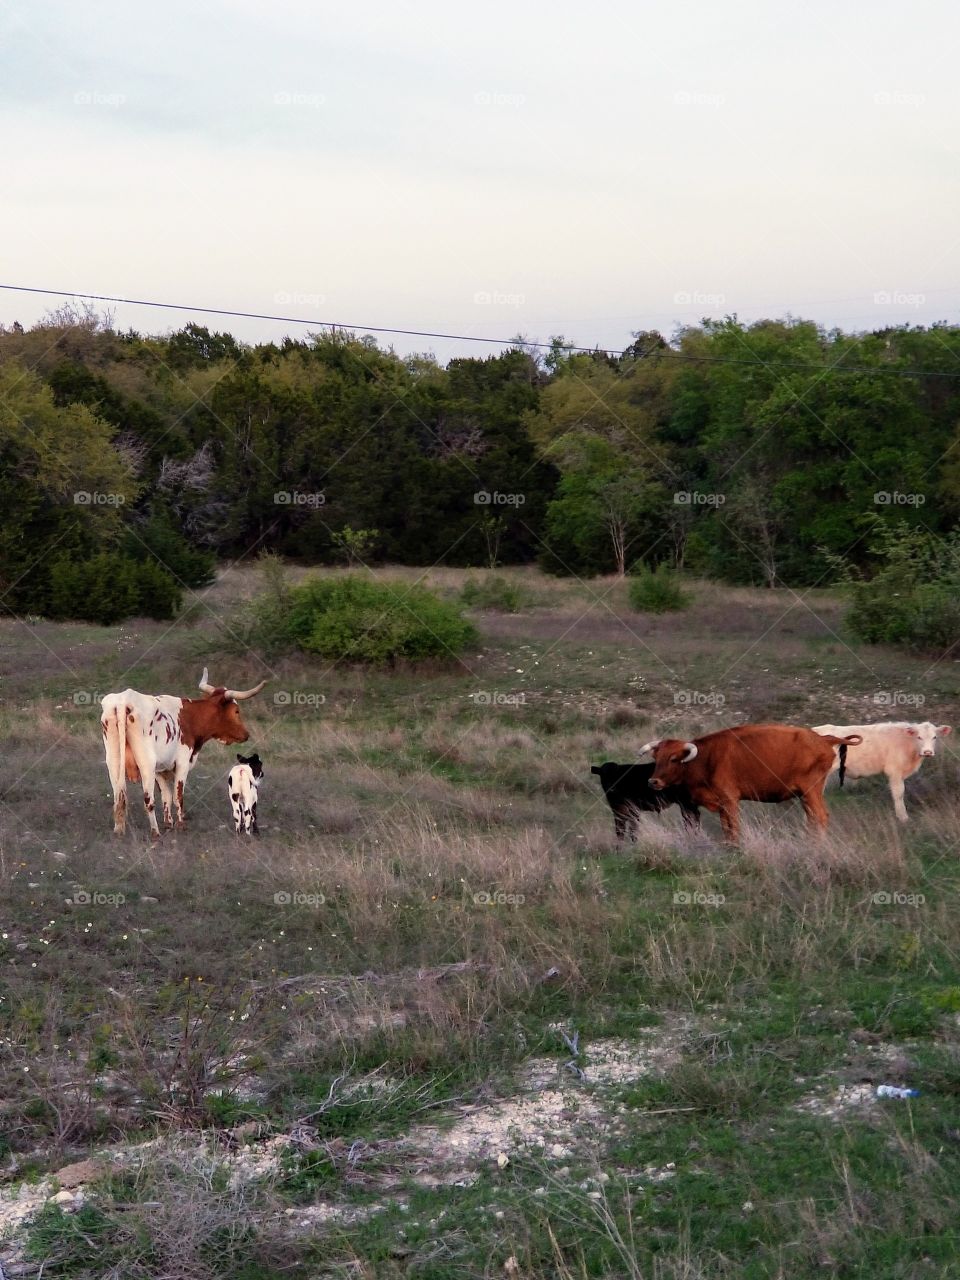 Texas Lomghorns graze on spring grass one evening at Fort Hood, Texas.